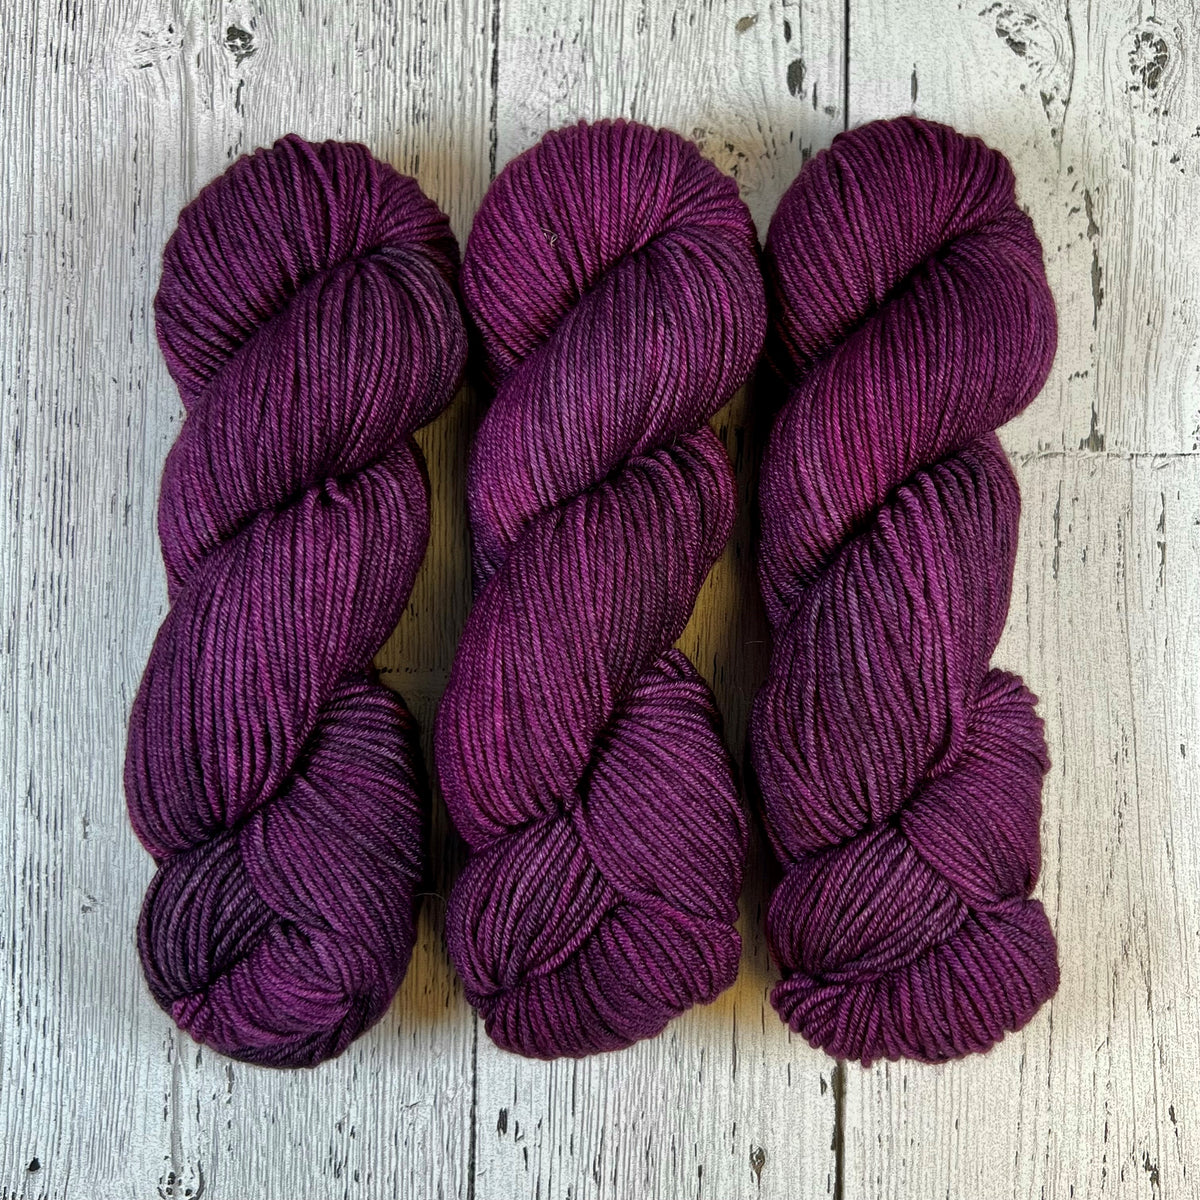 Kismet - Fioritura Worsted - Dyed Stock